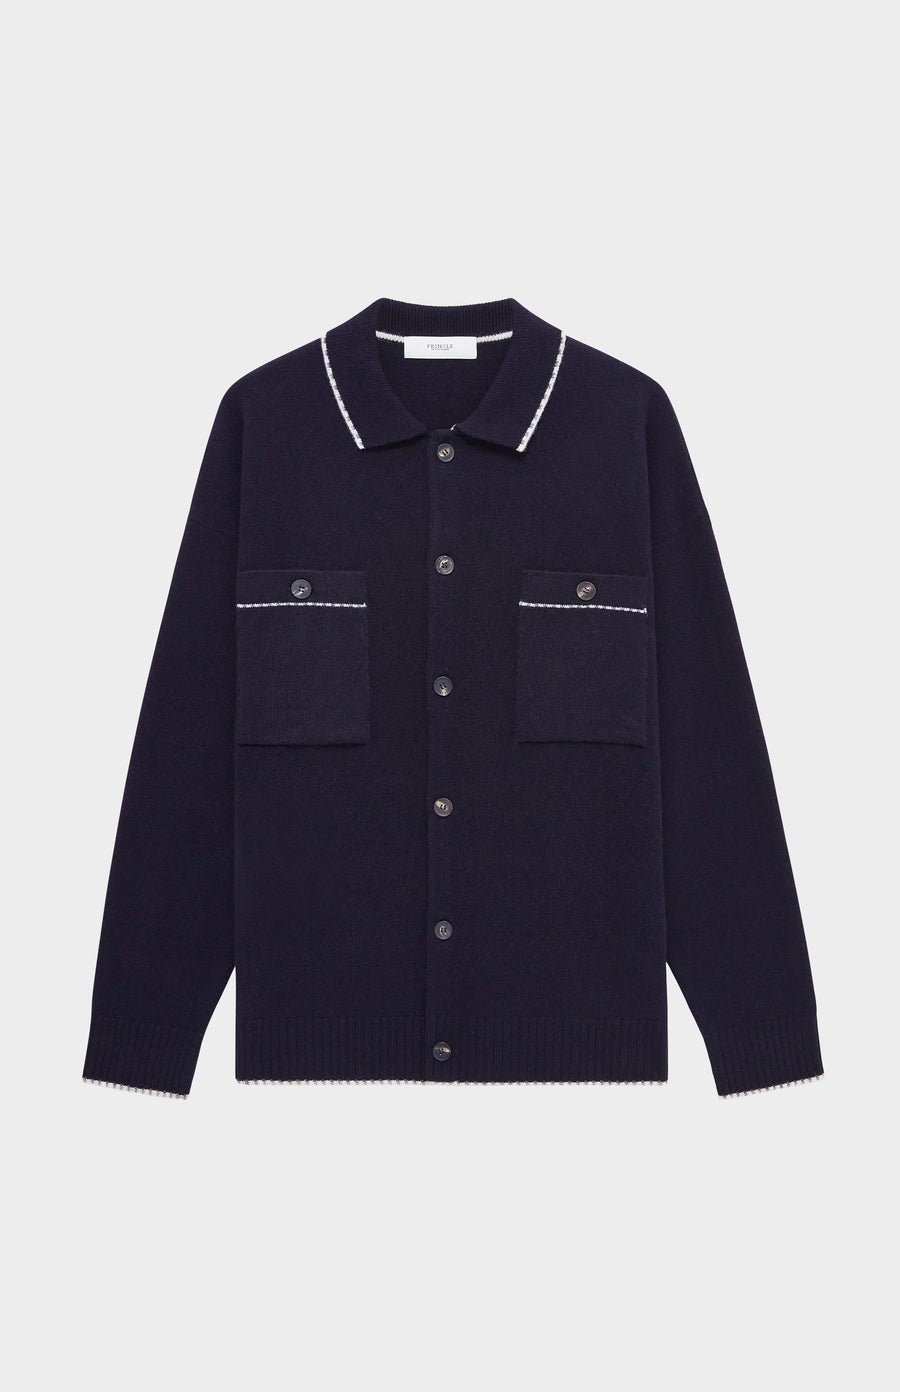 Pringle Knitted lambswool overshirt in Navy with contrast edging